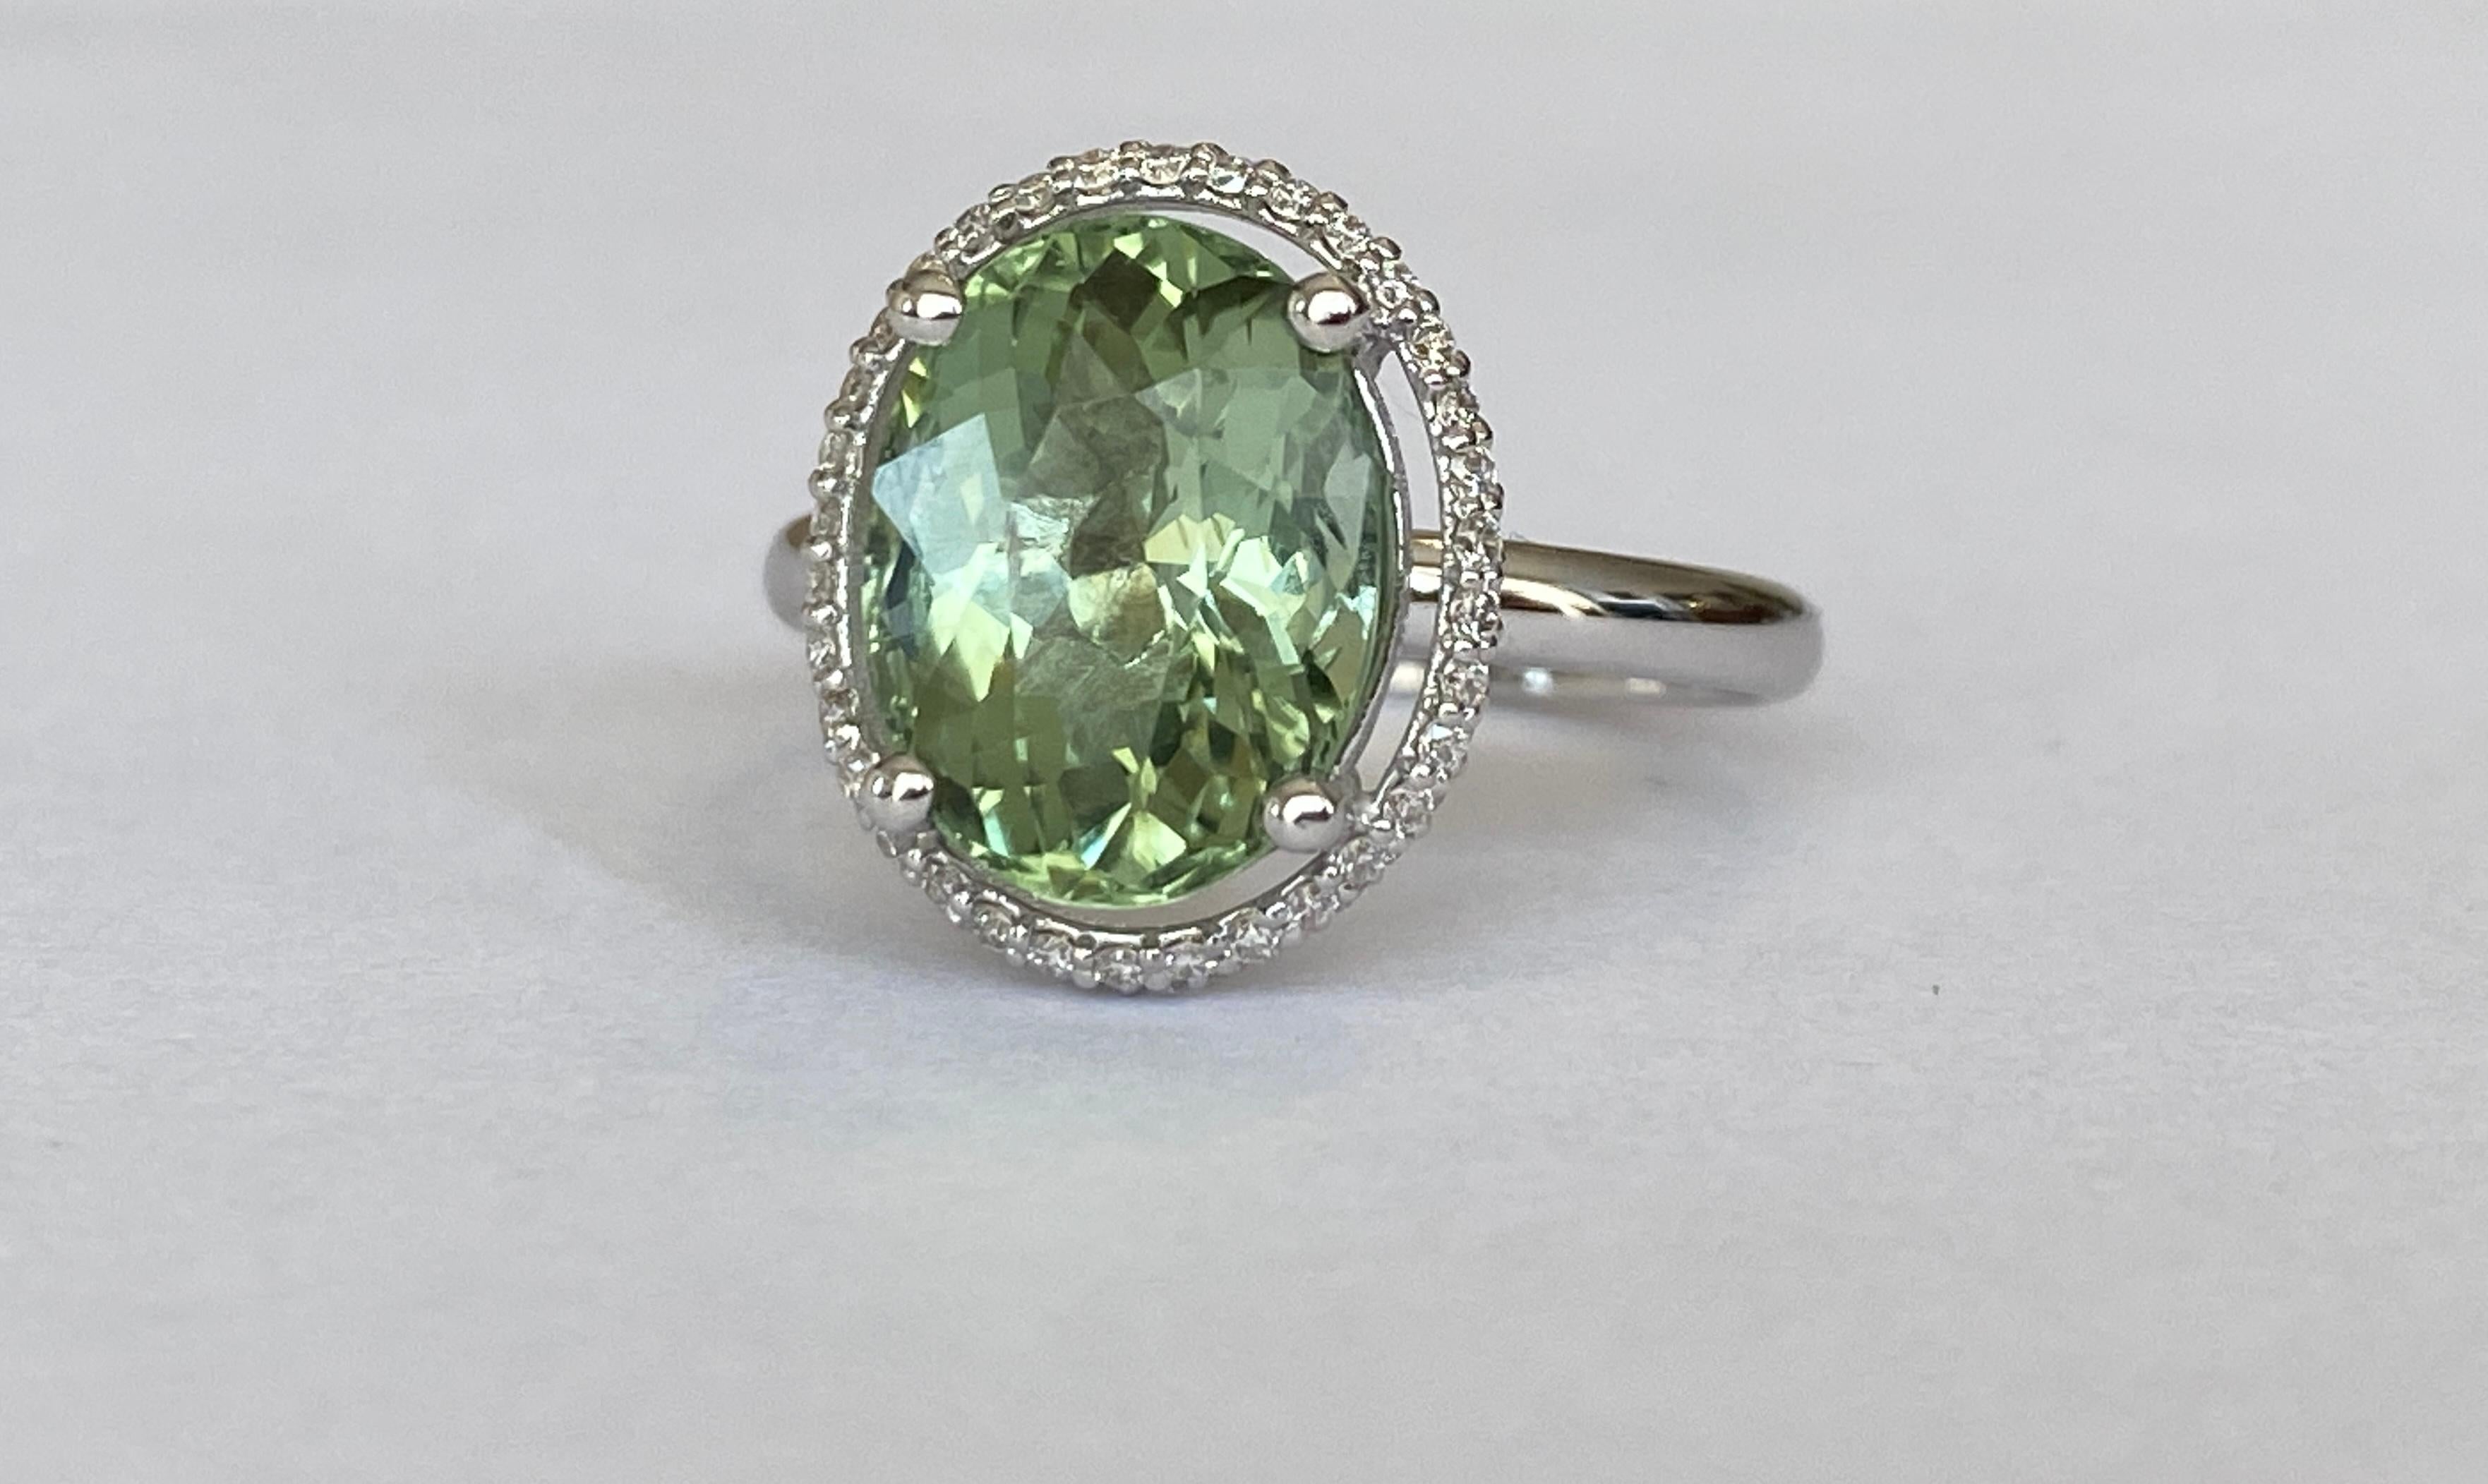 Oval Cut 18 Karat White Gold Diamond Cocktail Ring with 3.63 Carat Tourmaline For Sale